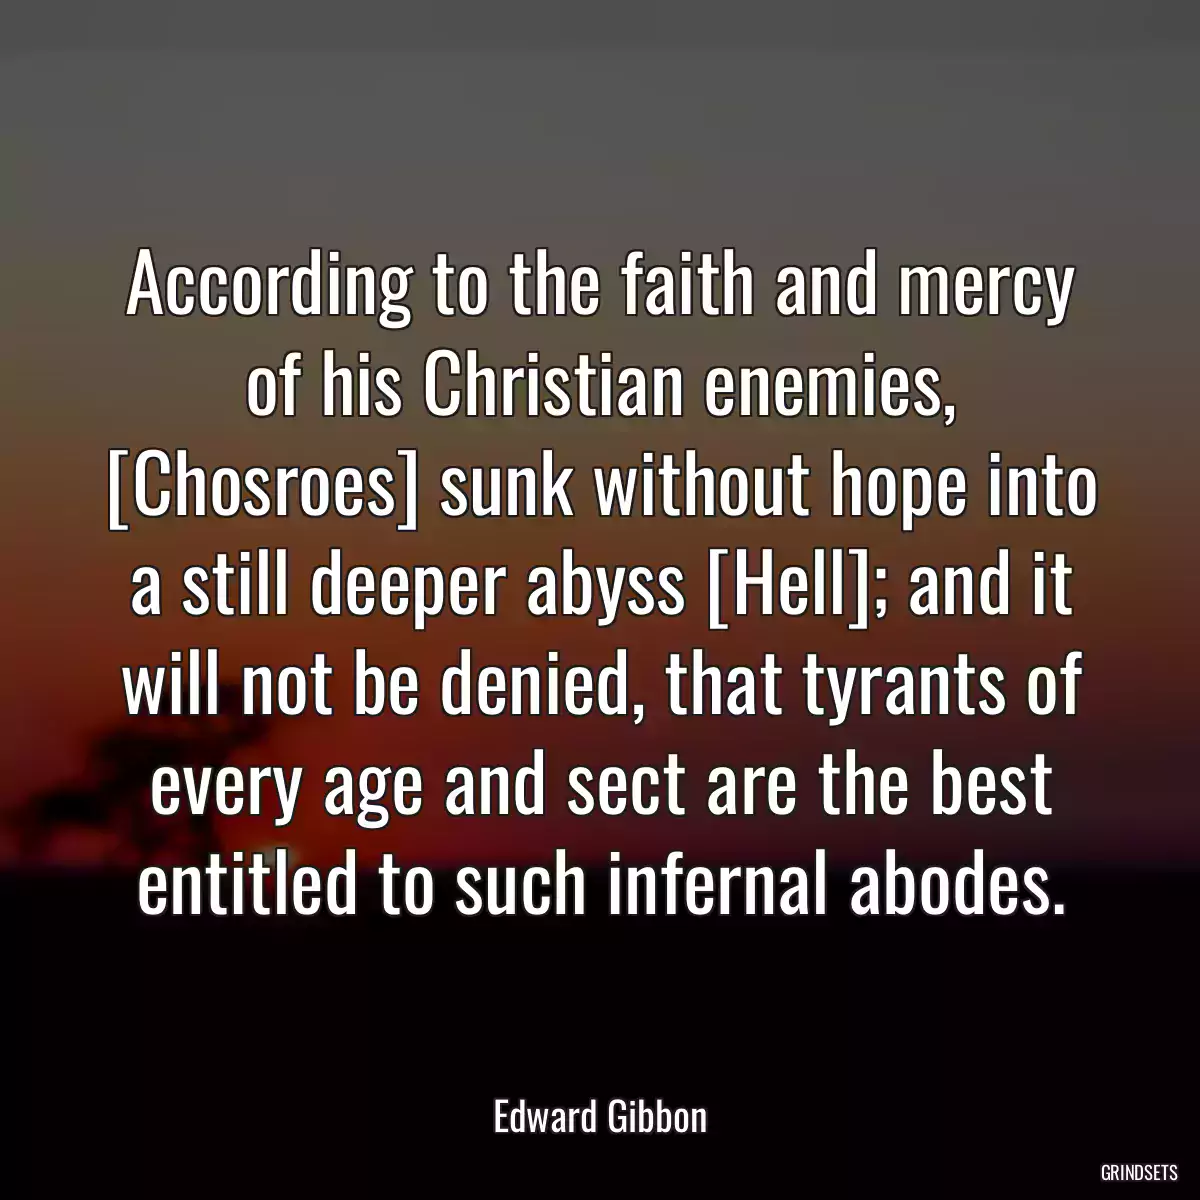 According to the faith and mercy of his Christian enemies, [Chosroes] sunk without hope into a still deeper abyss [Hell]; and it will not be denied, that tyrants of every age and sect are the best entitled to such infernal abodes.